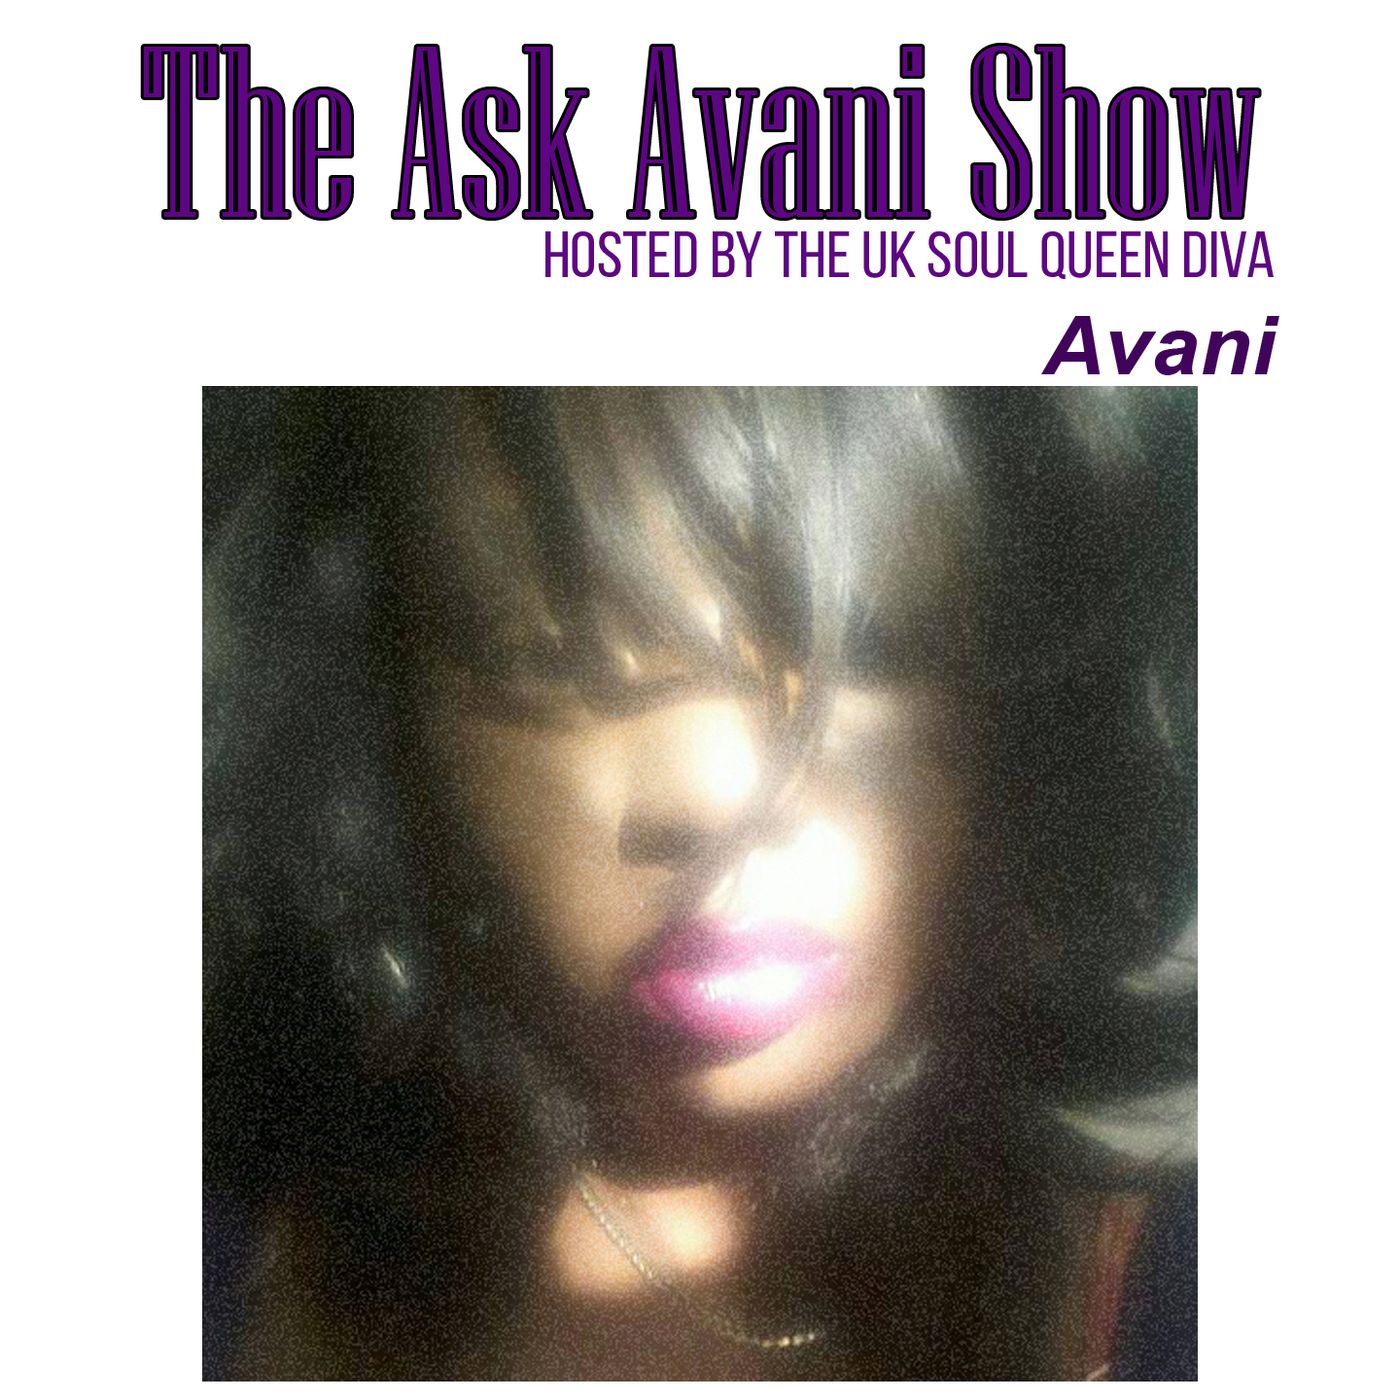 The Ask Avani Show